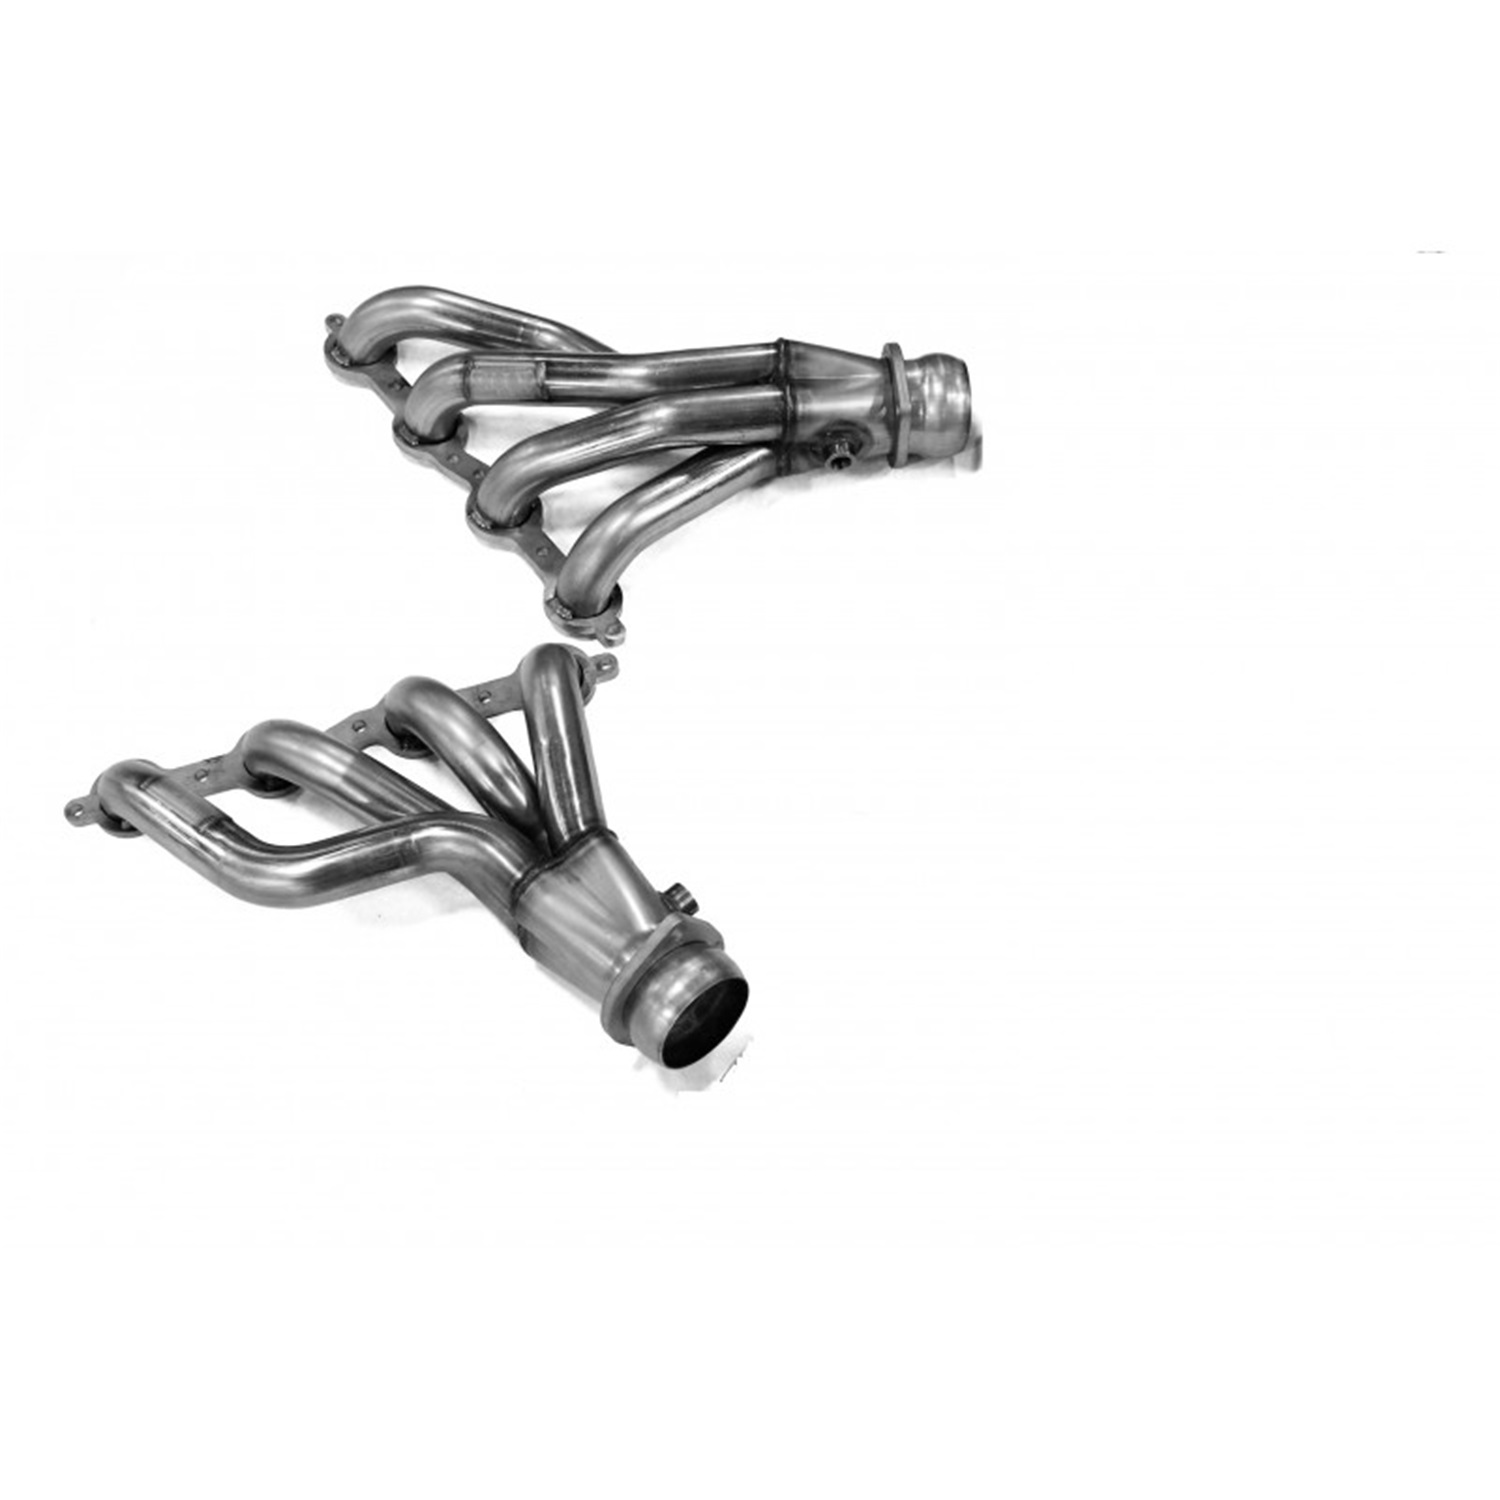 Stainless Steel Headers 1.875 x 3" Mid-Length Collector Incl. Ball And Socket Flange O2 Extensions Available LS Engine Swap